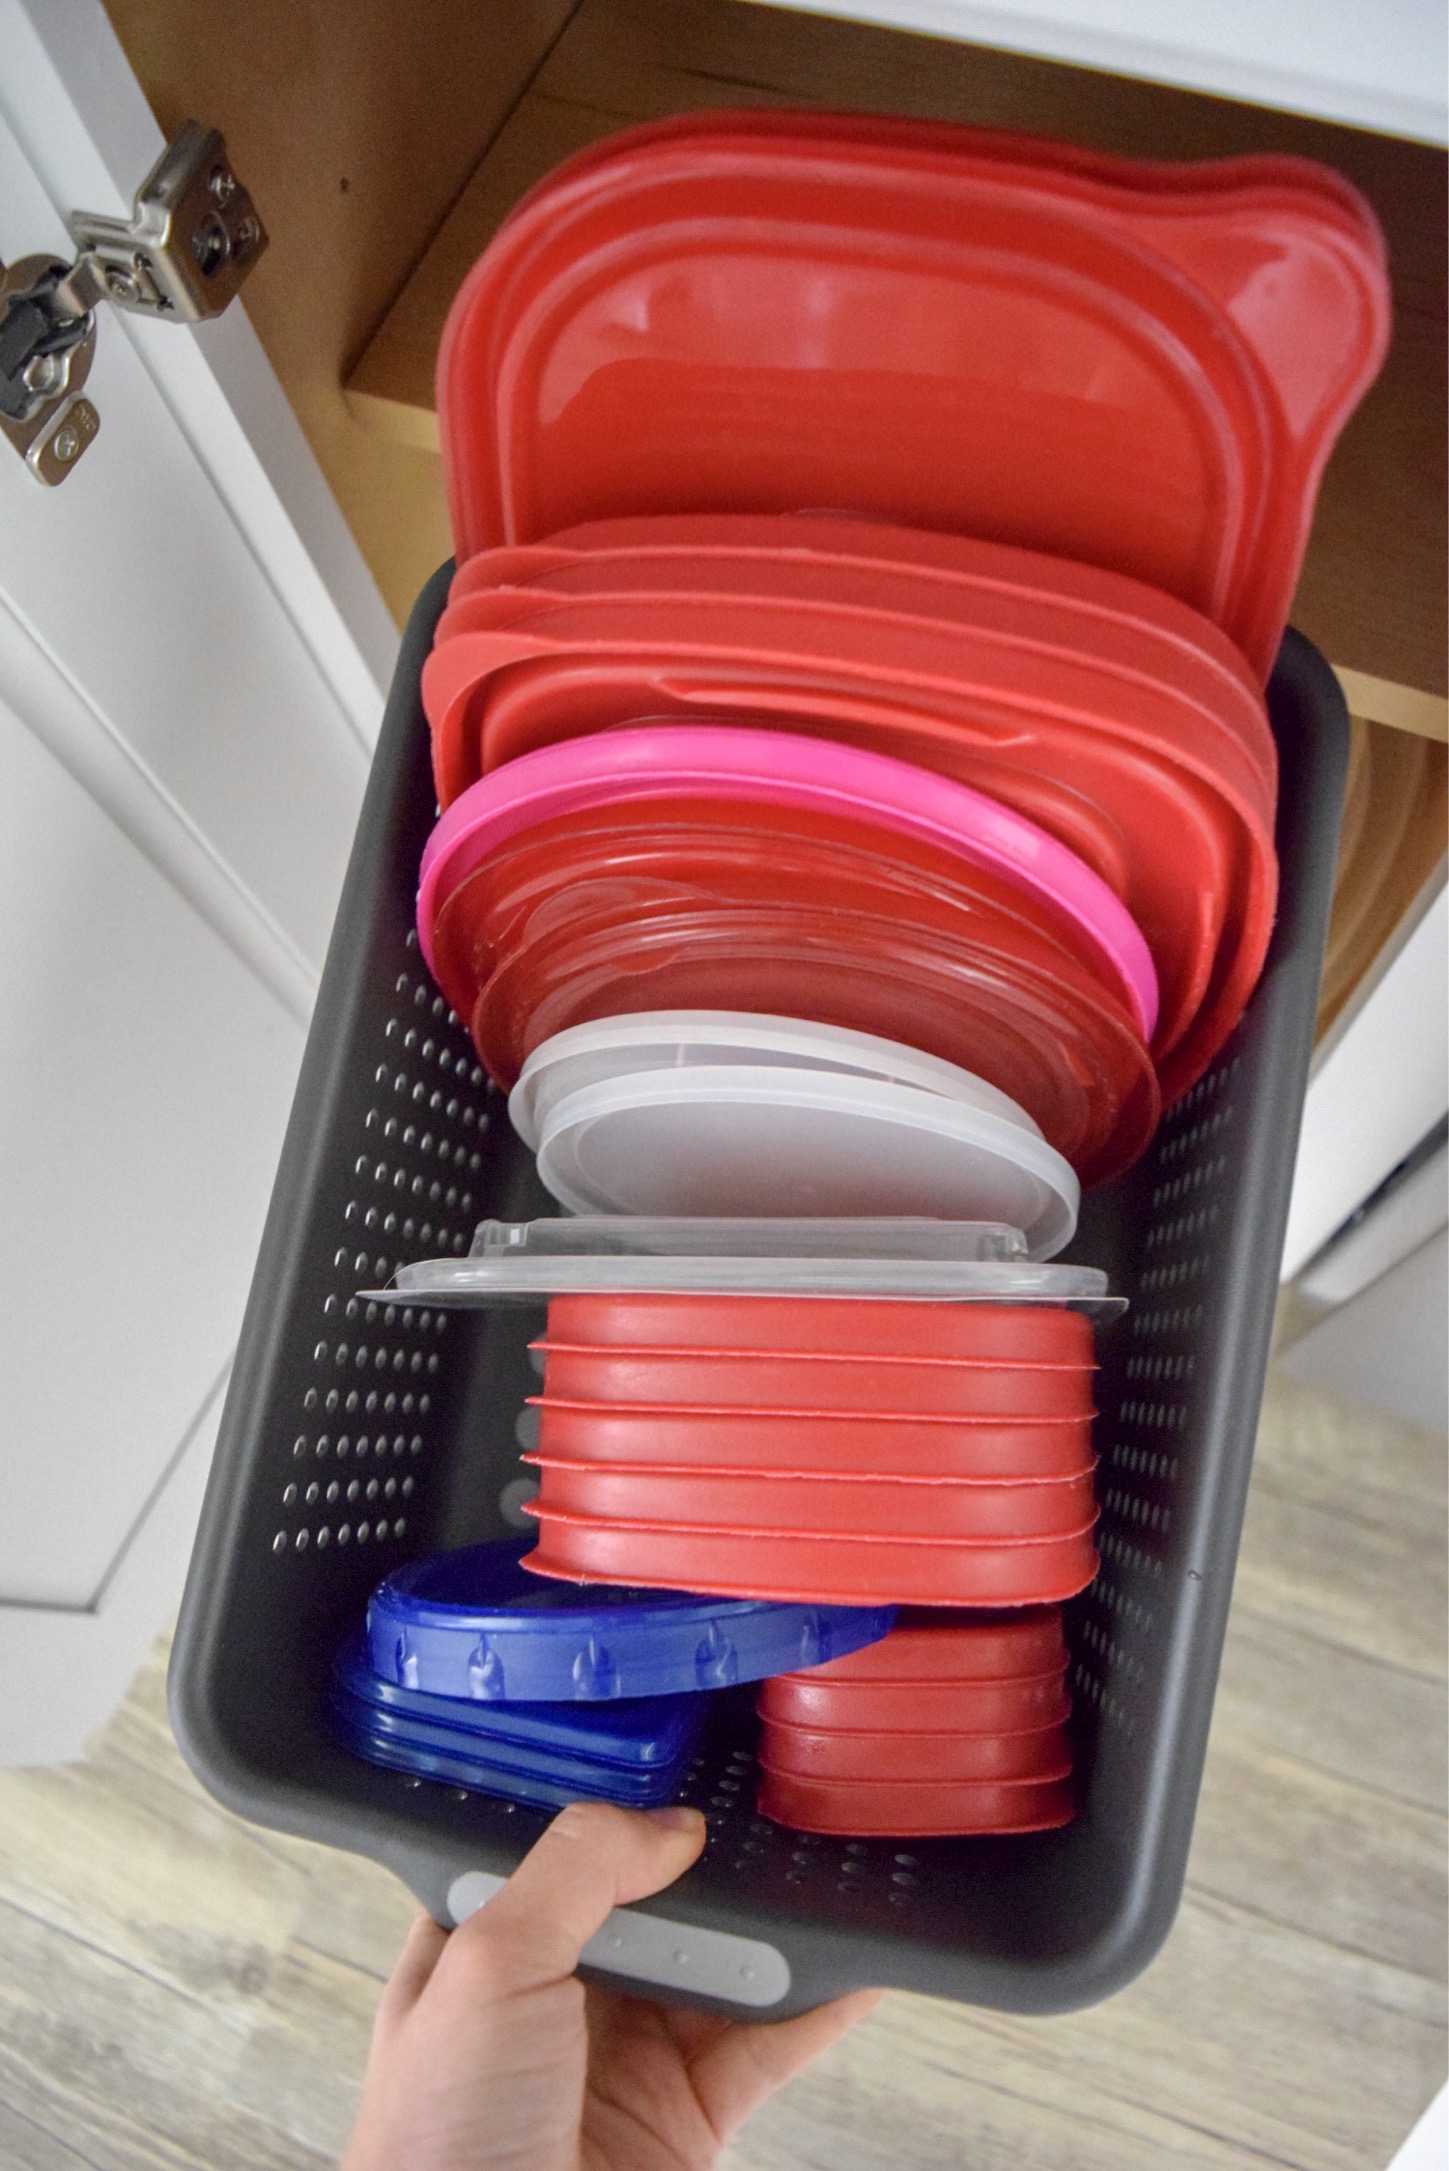 How To Organize Tupperware On A Budget - A Simplified Life